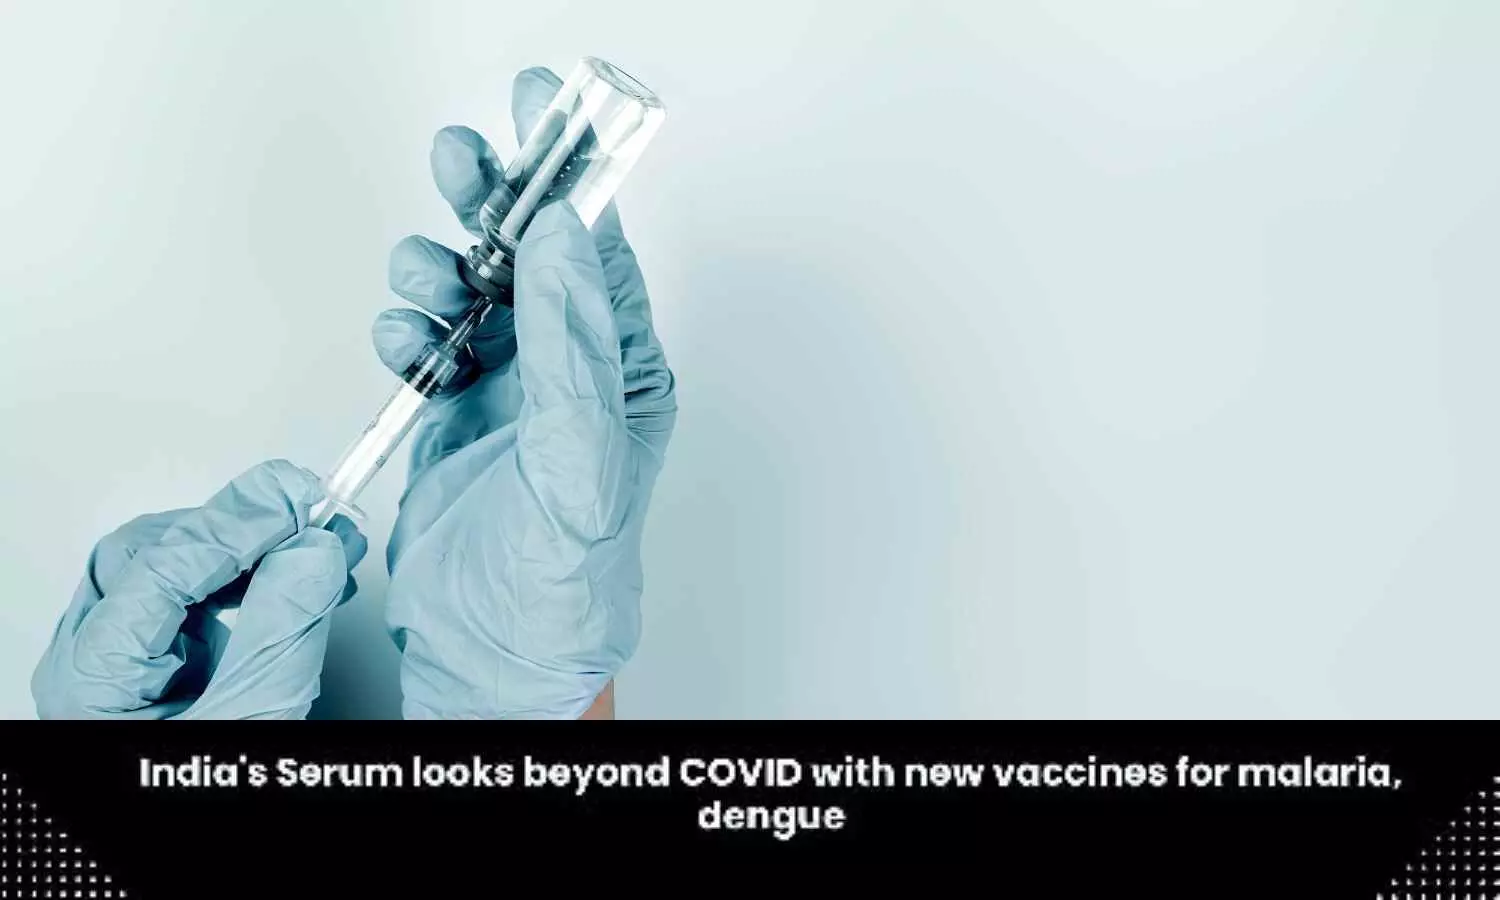 Serum Institute looks beyond COVID with new vaccines for malaria, dengue